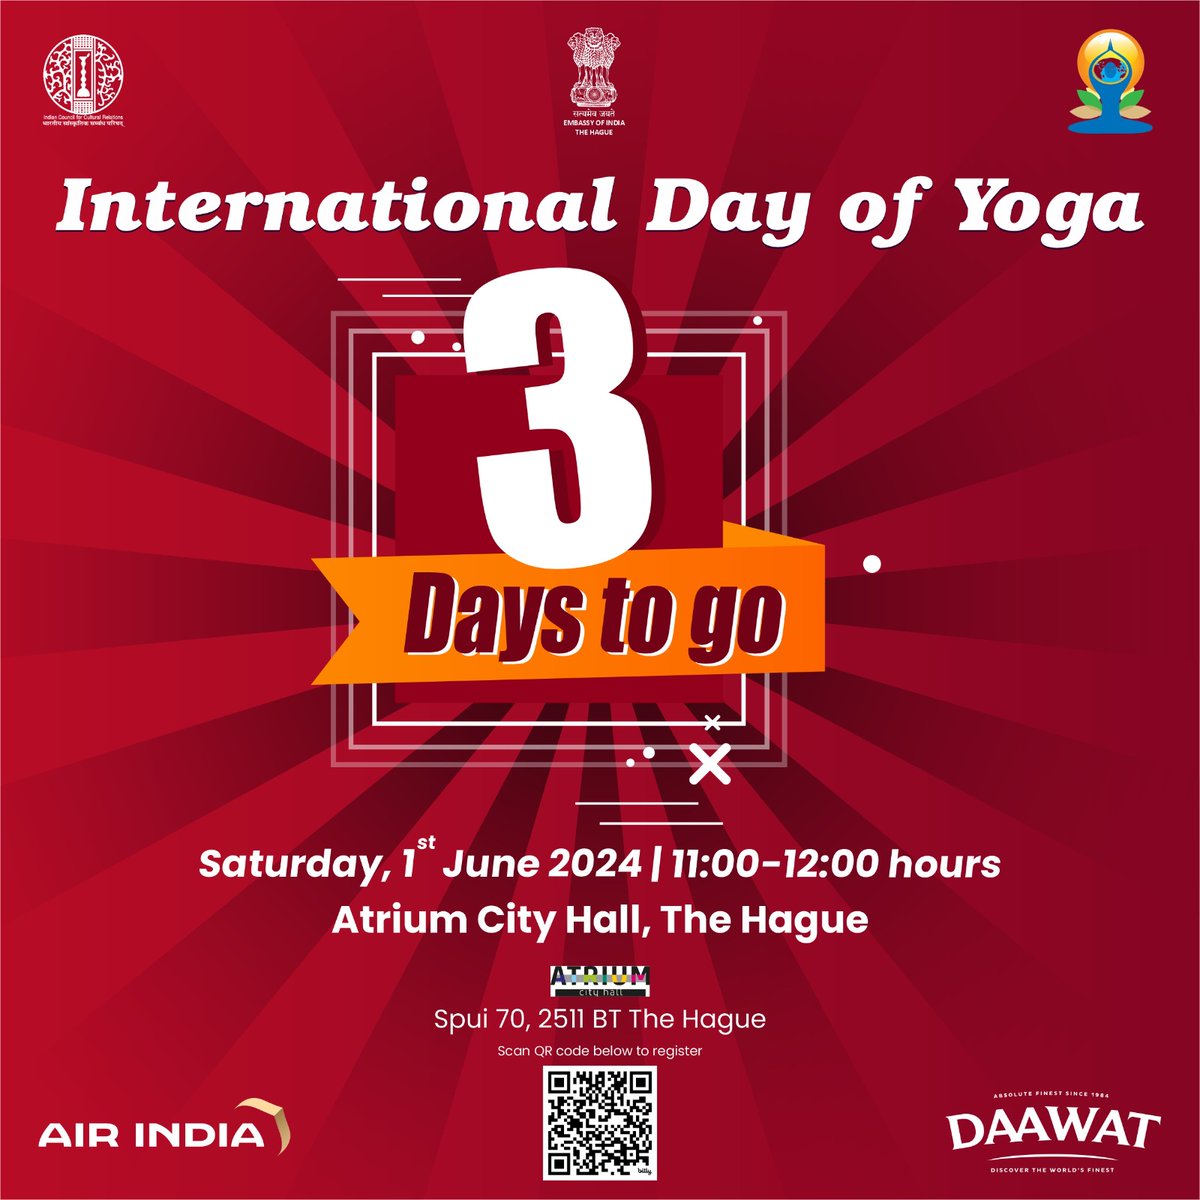 #IDY2024 celebrations in Den Haag ! Join us for the 10th #InternationalDayofYoga2024 on Saturday, 1st June
@AtriumCityHall in association with @GemeenteDenHaag

We encourage to carry your own yoga mat.  Register @ bit.ly/4b7fWIY or scan QR code👇 
#countdown #yoga